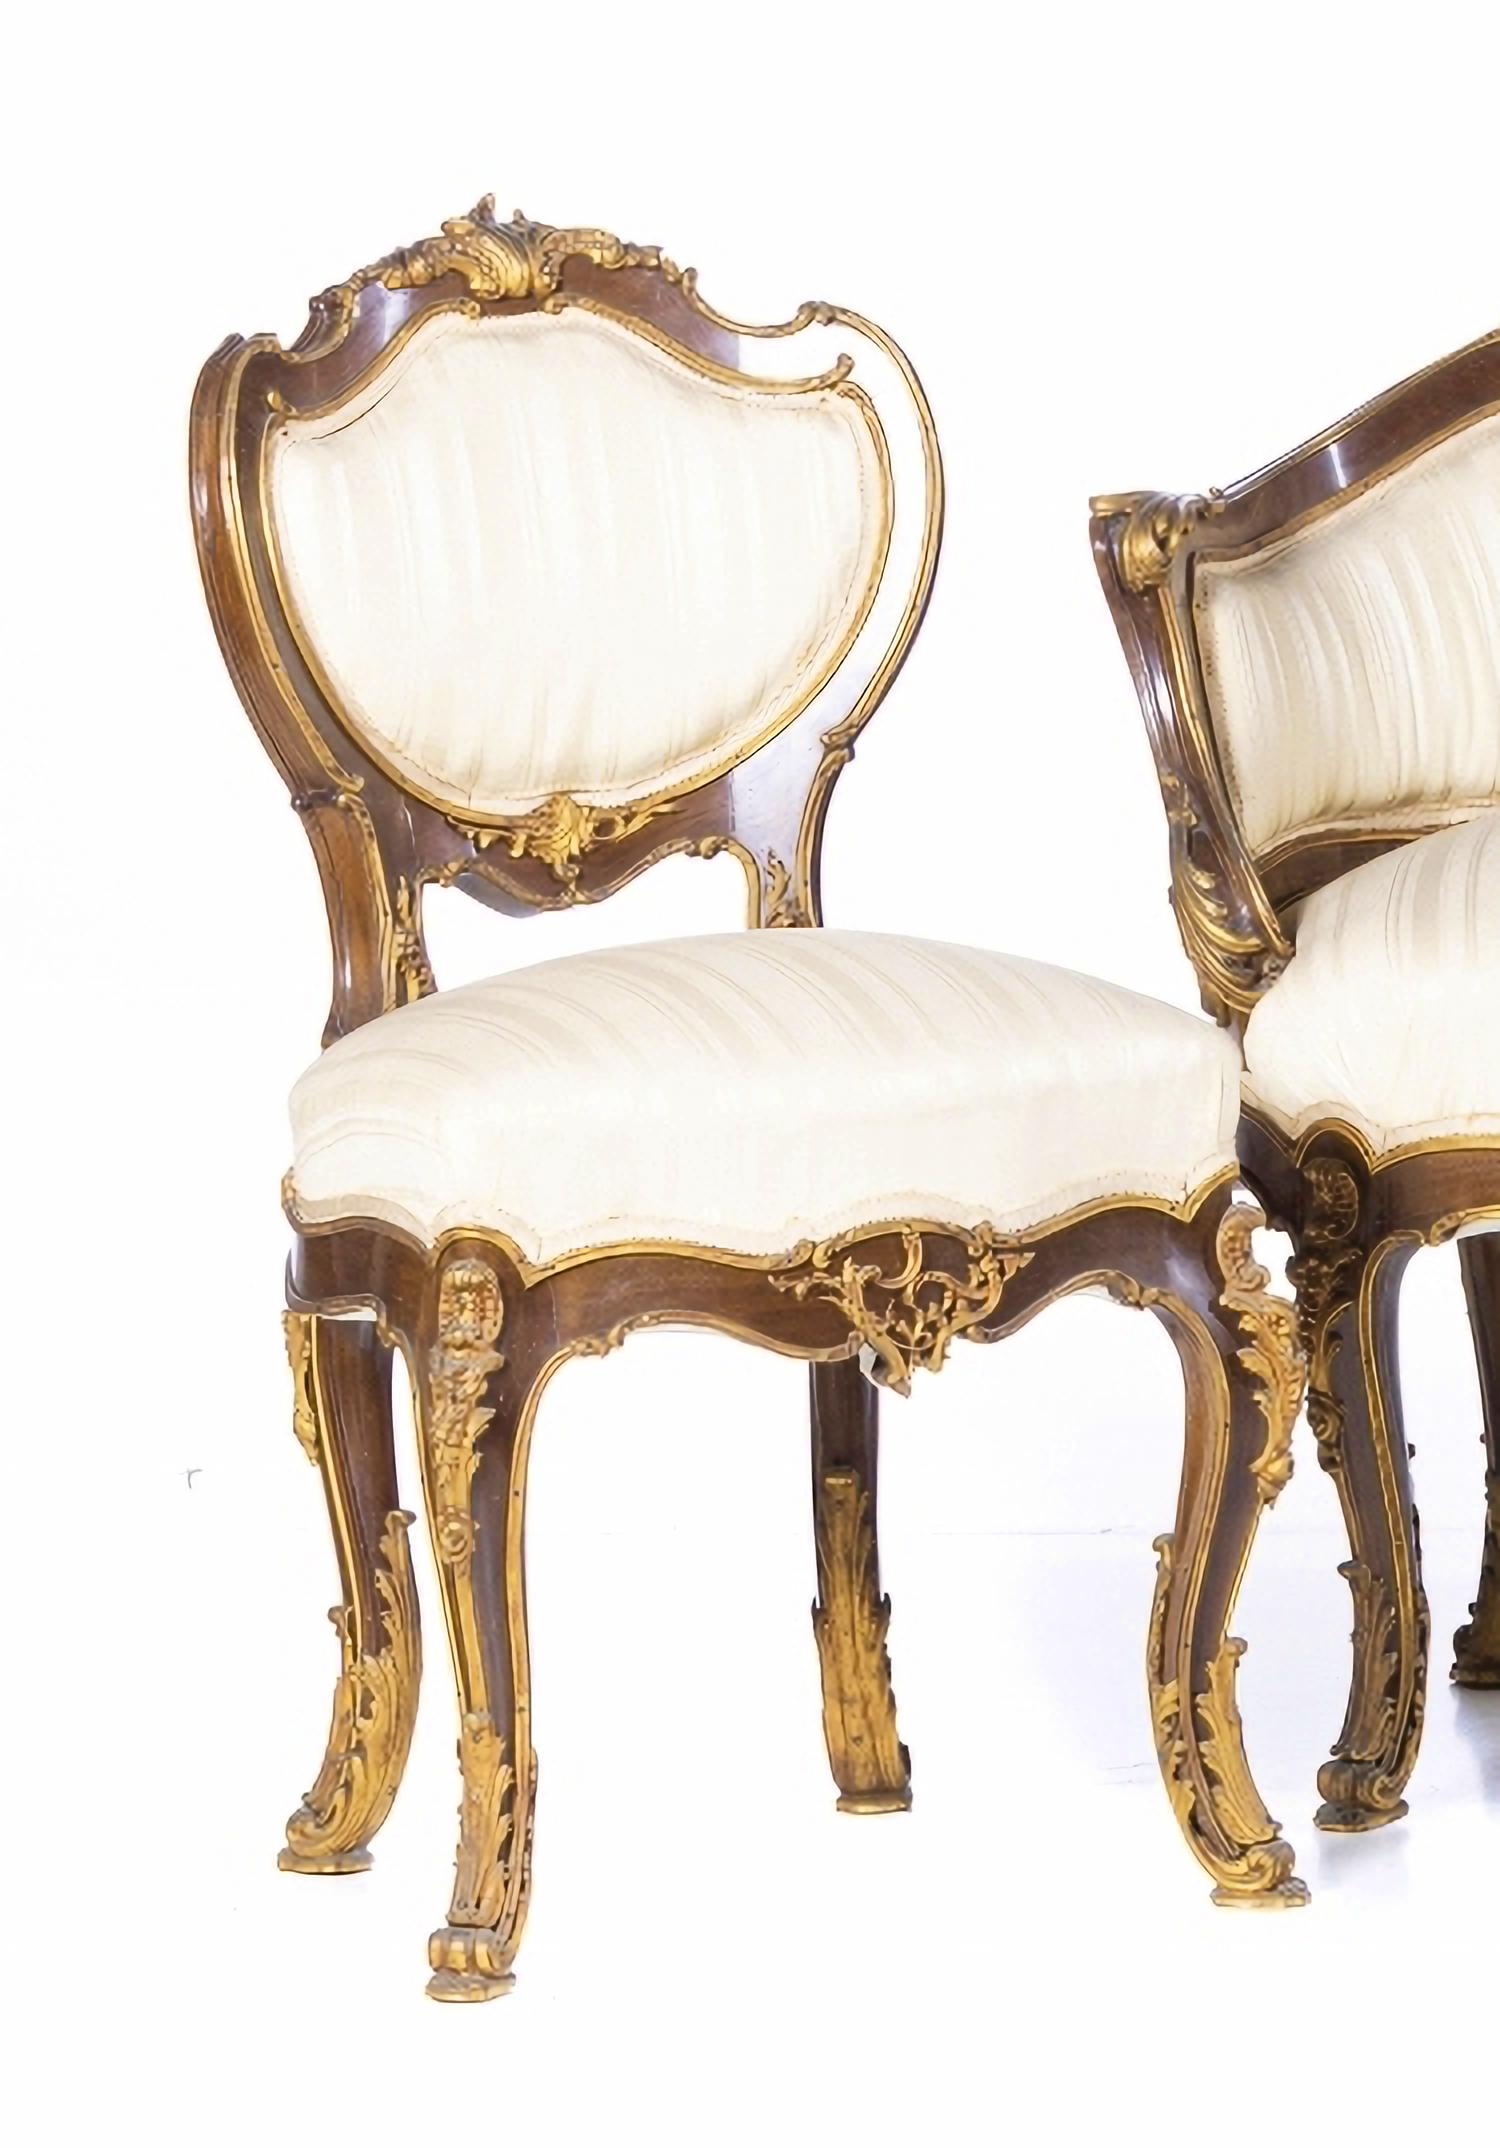 CANAPE AND PAIR OF LOUIS XV STYLE CHAIRS

French 19th Century
in mahogany wood with gilded and relief bronzes. Upholstered seats and back.
Dim.: (settee) 88 x 125 x 58 cm.
Good conditions.